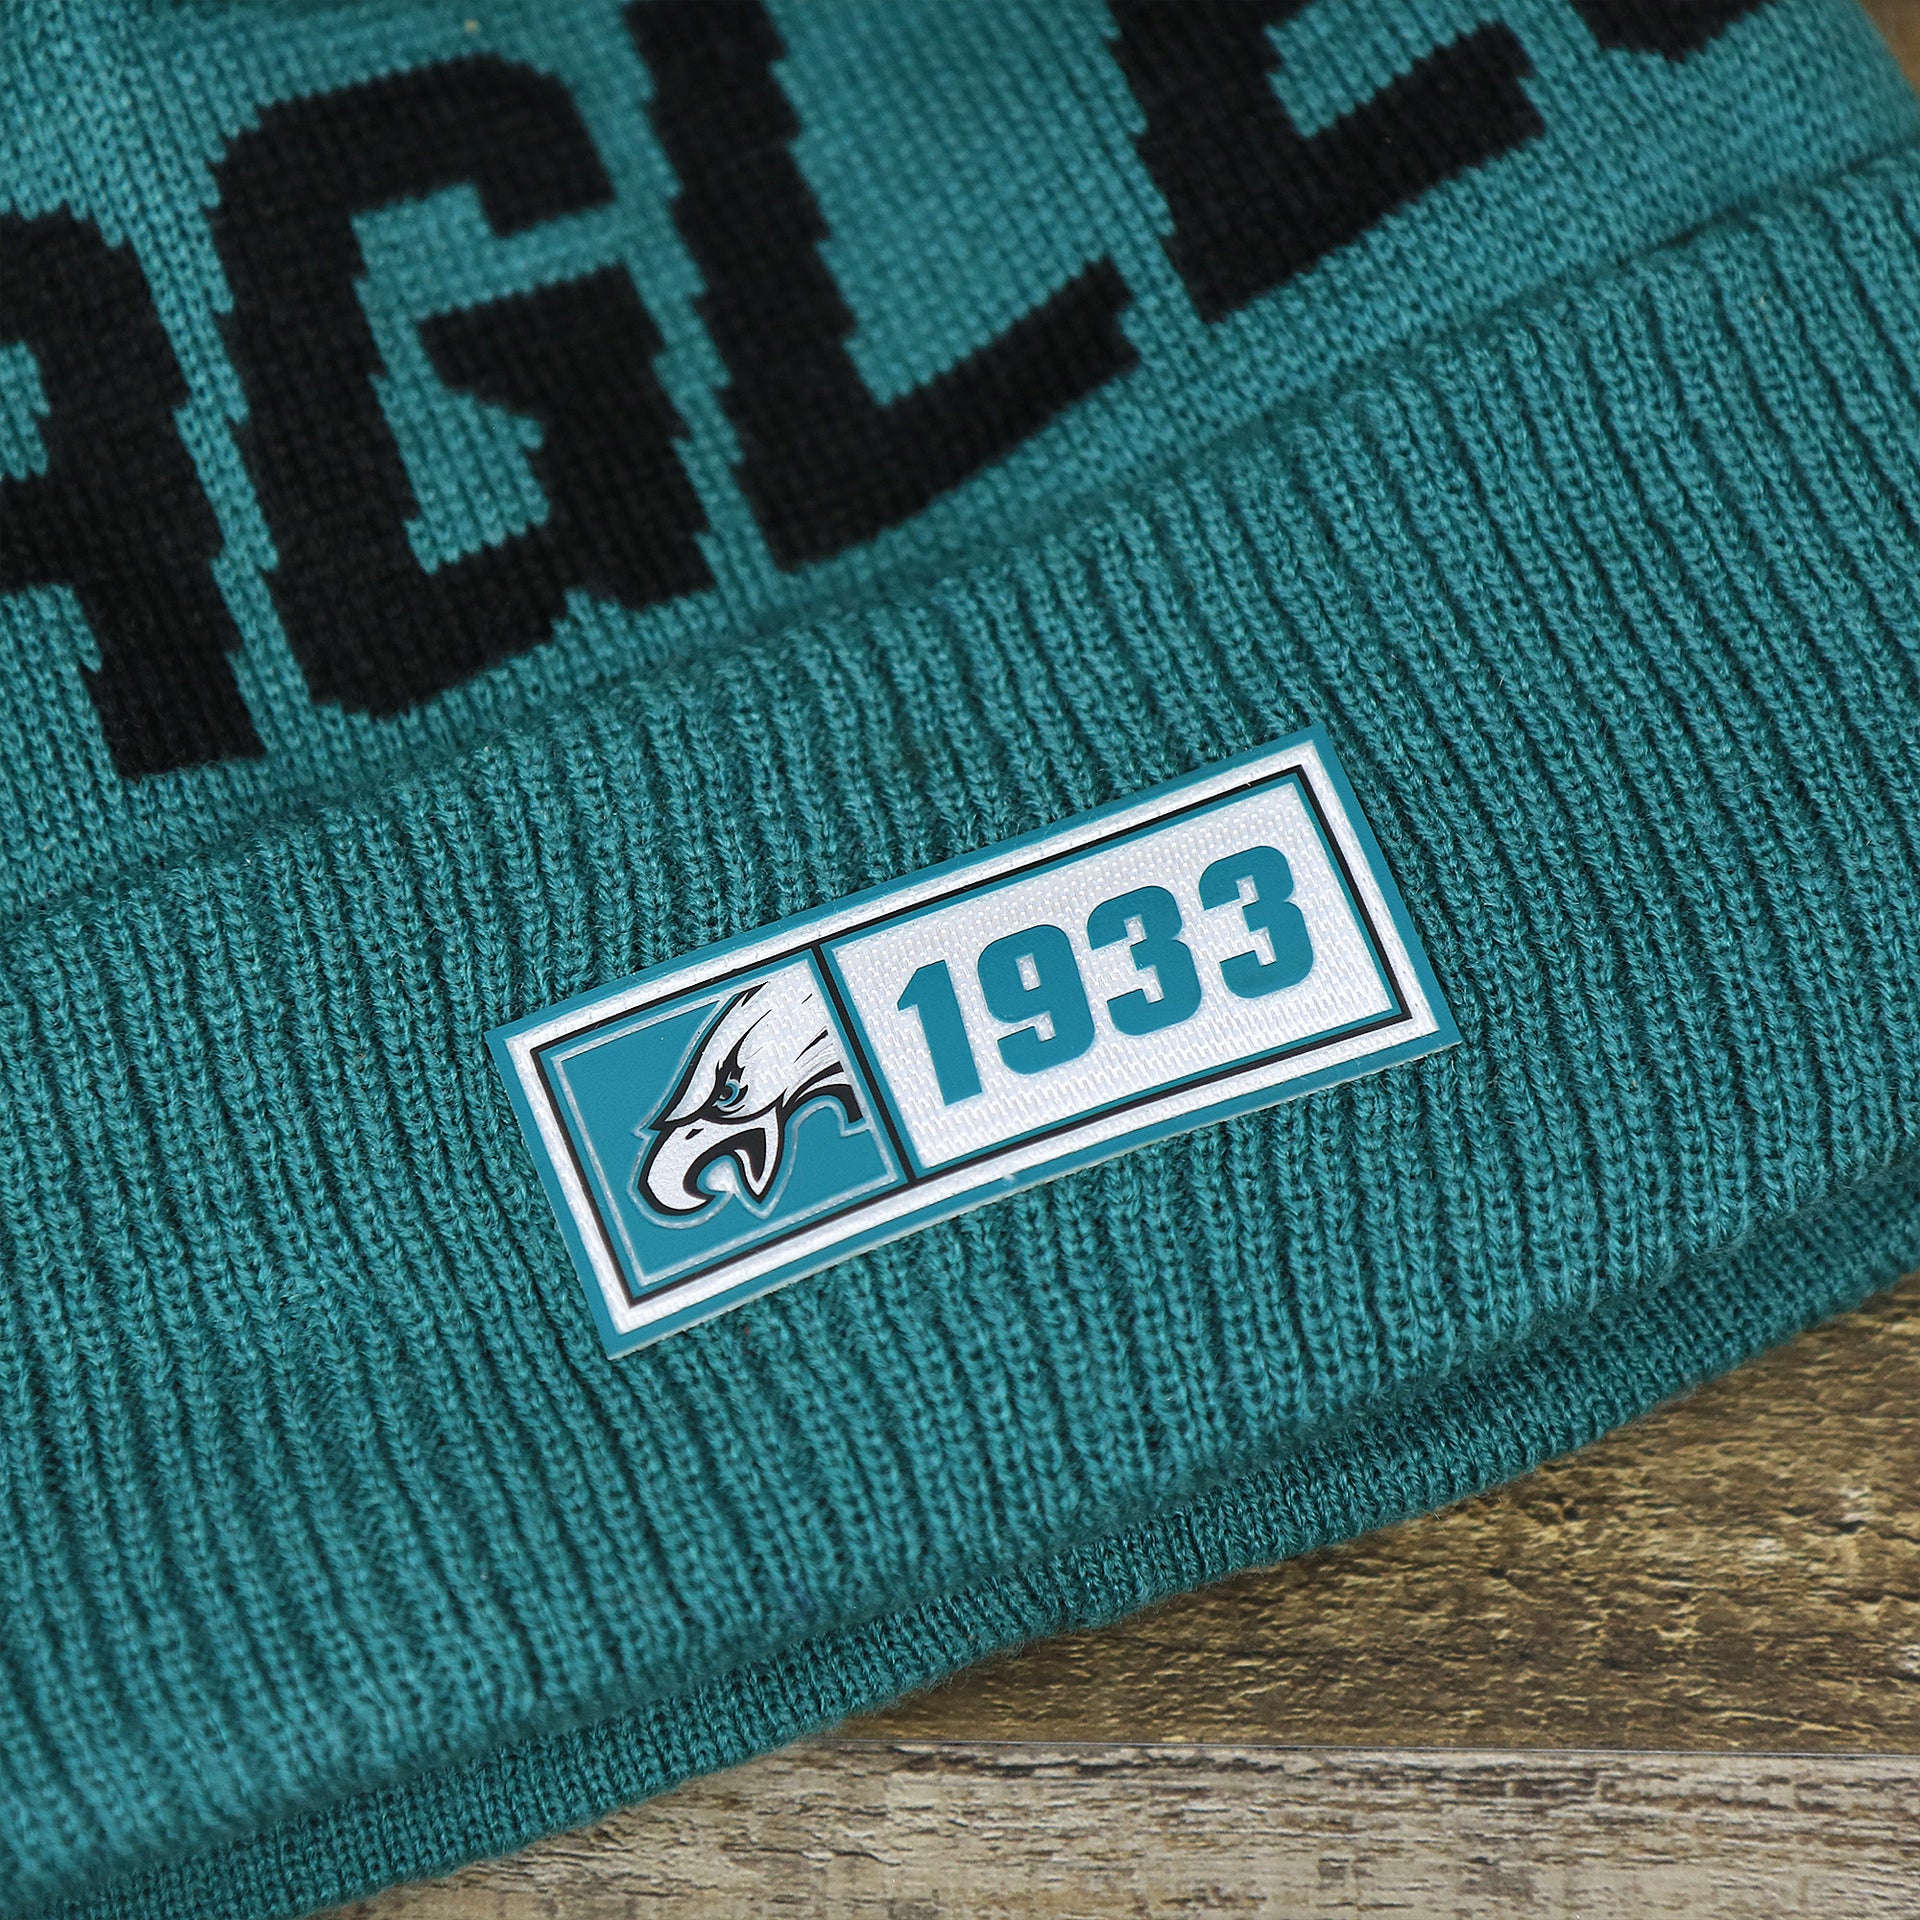 The 1933 Eagles Rubber Logo on the Philadelphia Eagles On Field Since 1933 Eagles Patch Winter Pom Pom Beanie | Midnight Green Winter Beanie